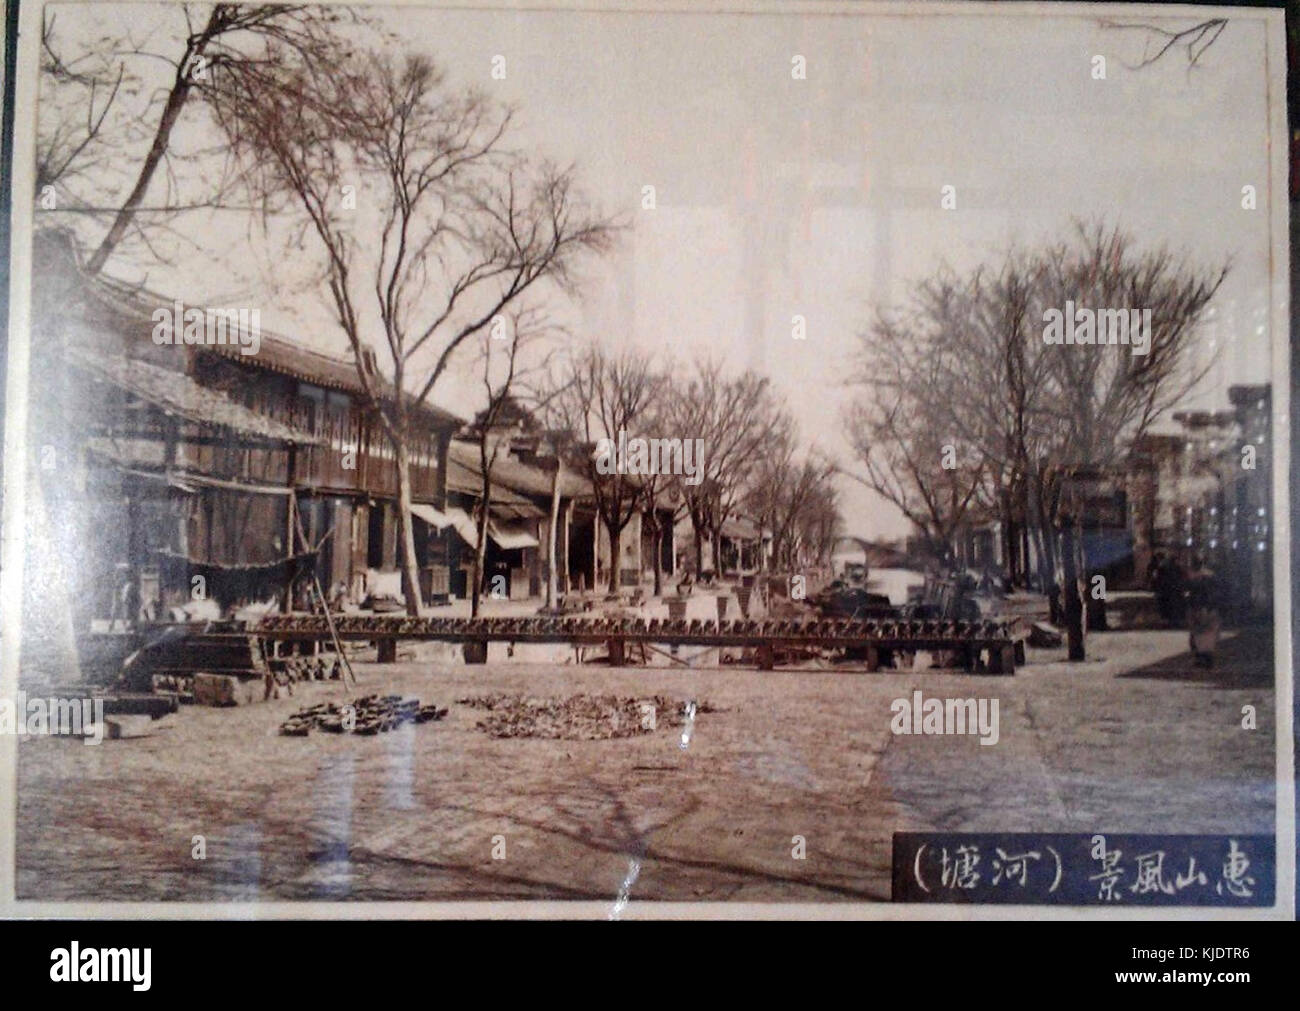 The historical photograph about Wuxi Huishan Ancient Town Stock Photo